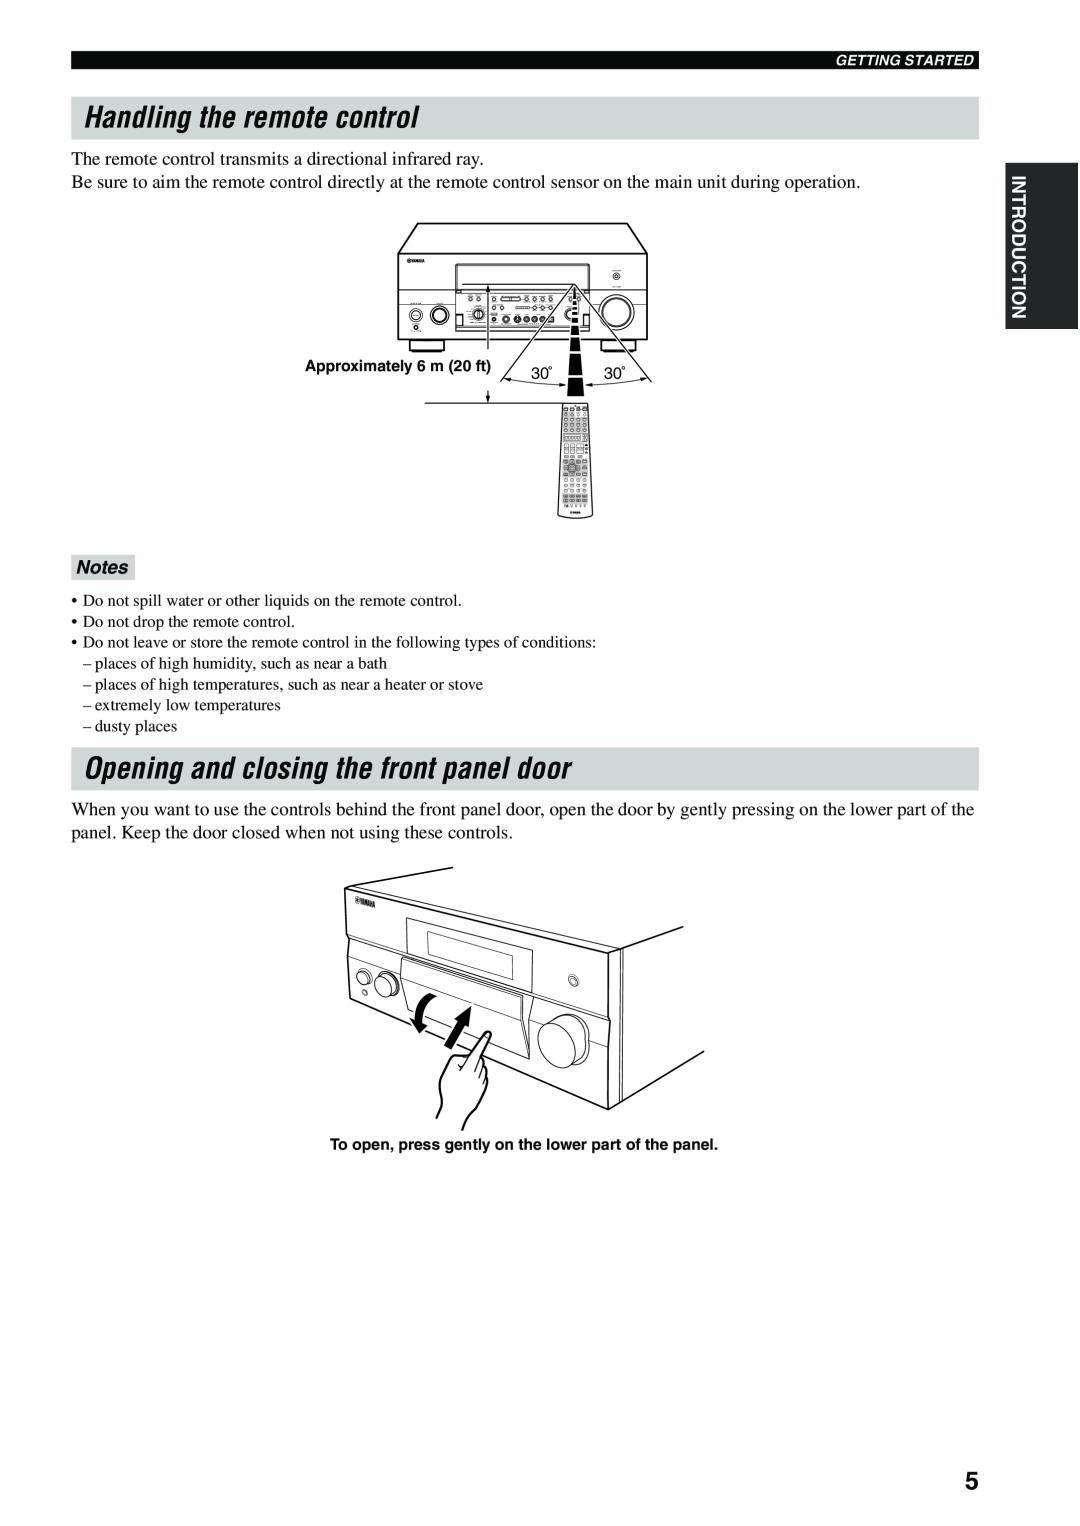 Yamaha X-V2600 owner manual Handling the remote control, Opening and closing the front panel door, Notes 